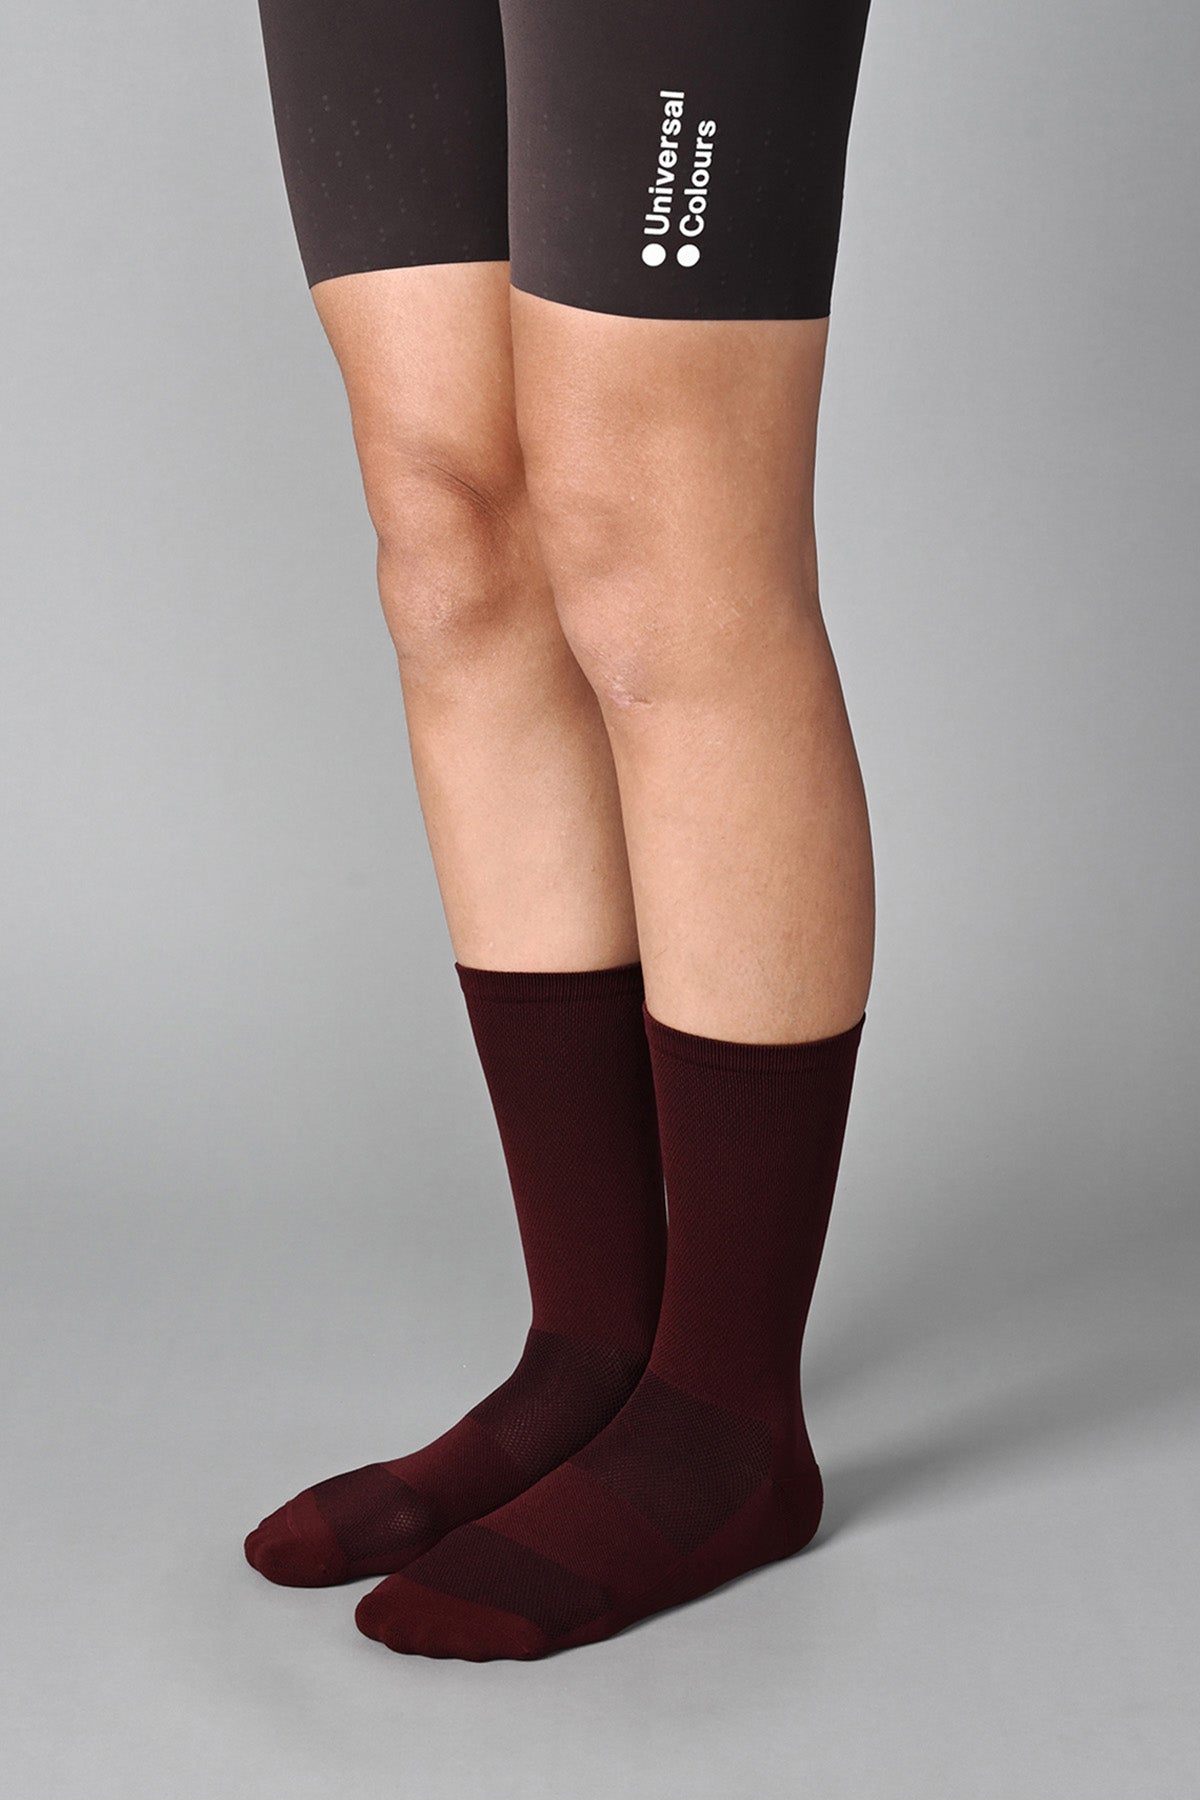 STEALTH - BURGUNDY FRONT SIDE | BEST CYCLING SOCKS